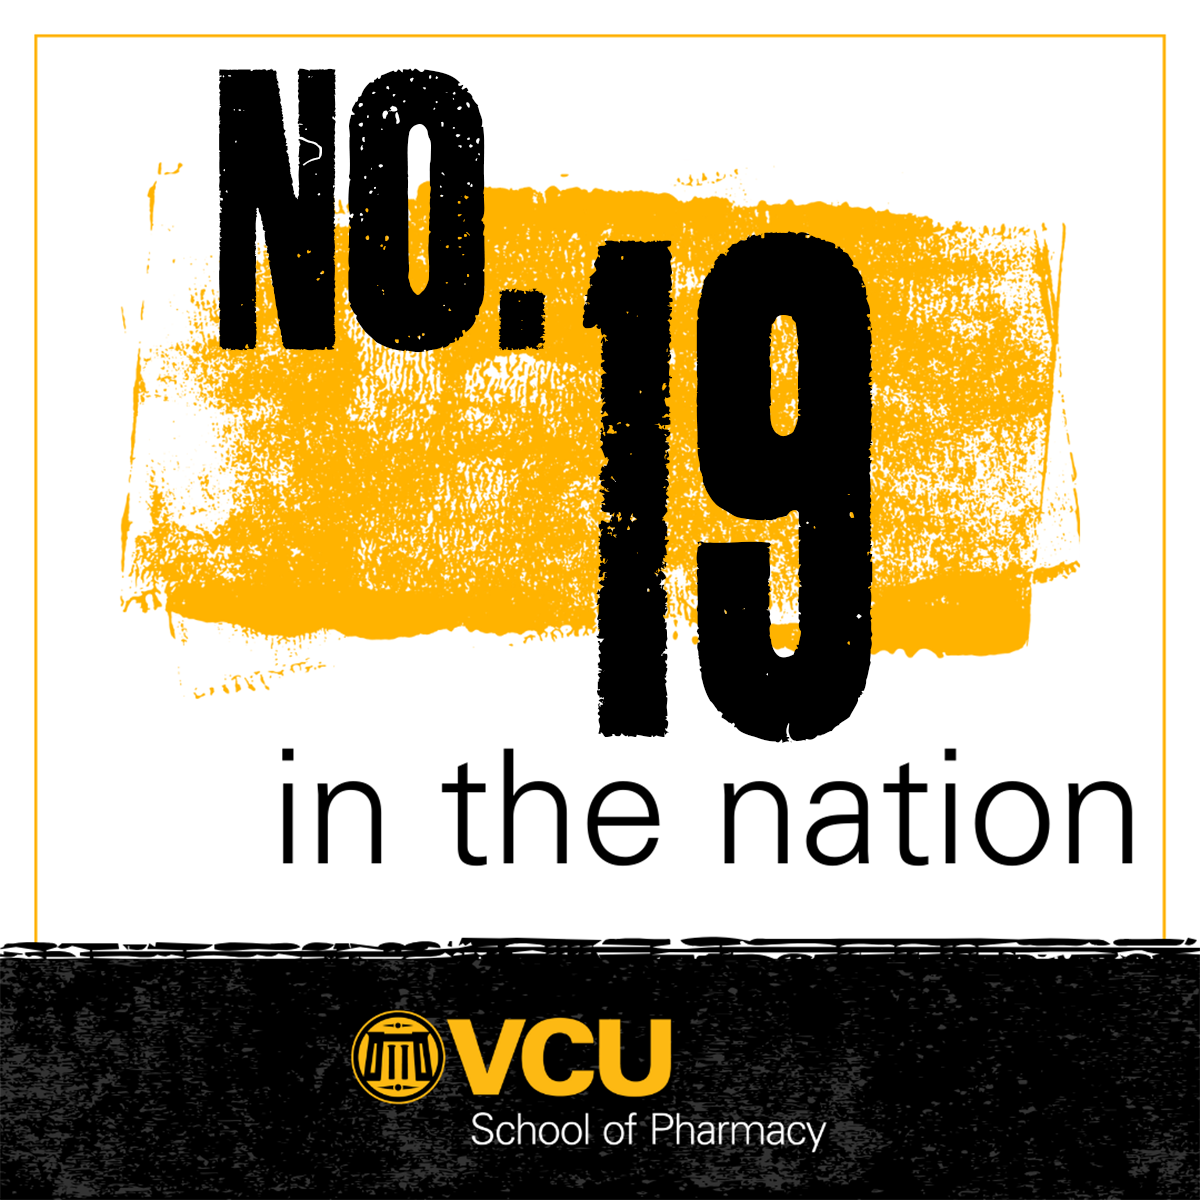 A paint-rolled graphic with the words "No. 19 in the nation" above "VCU School of Pharmacy."